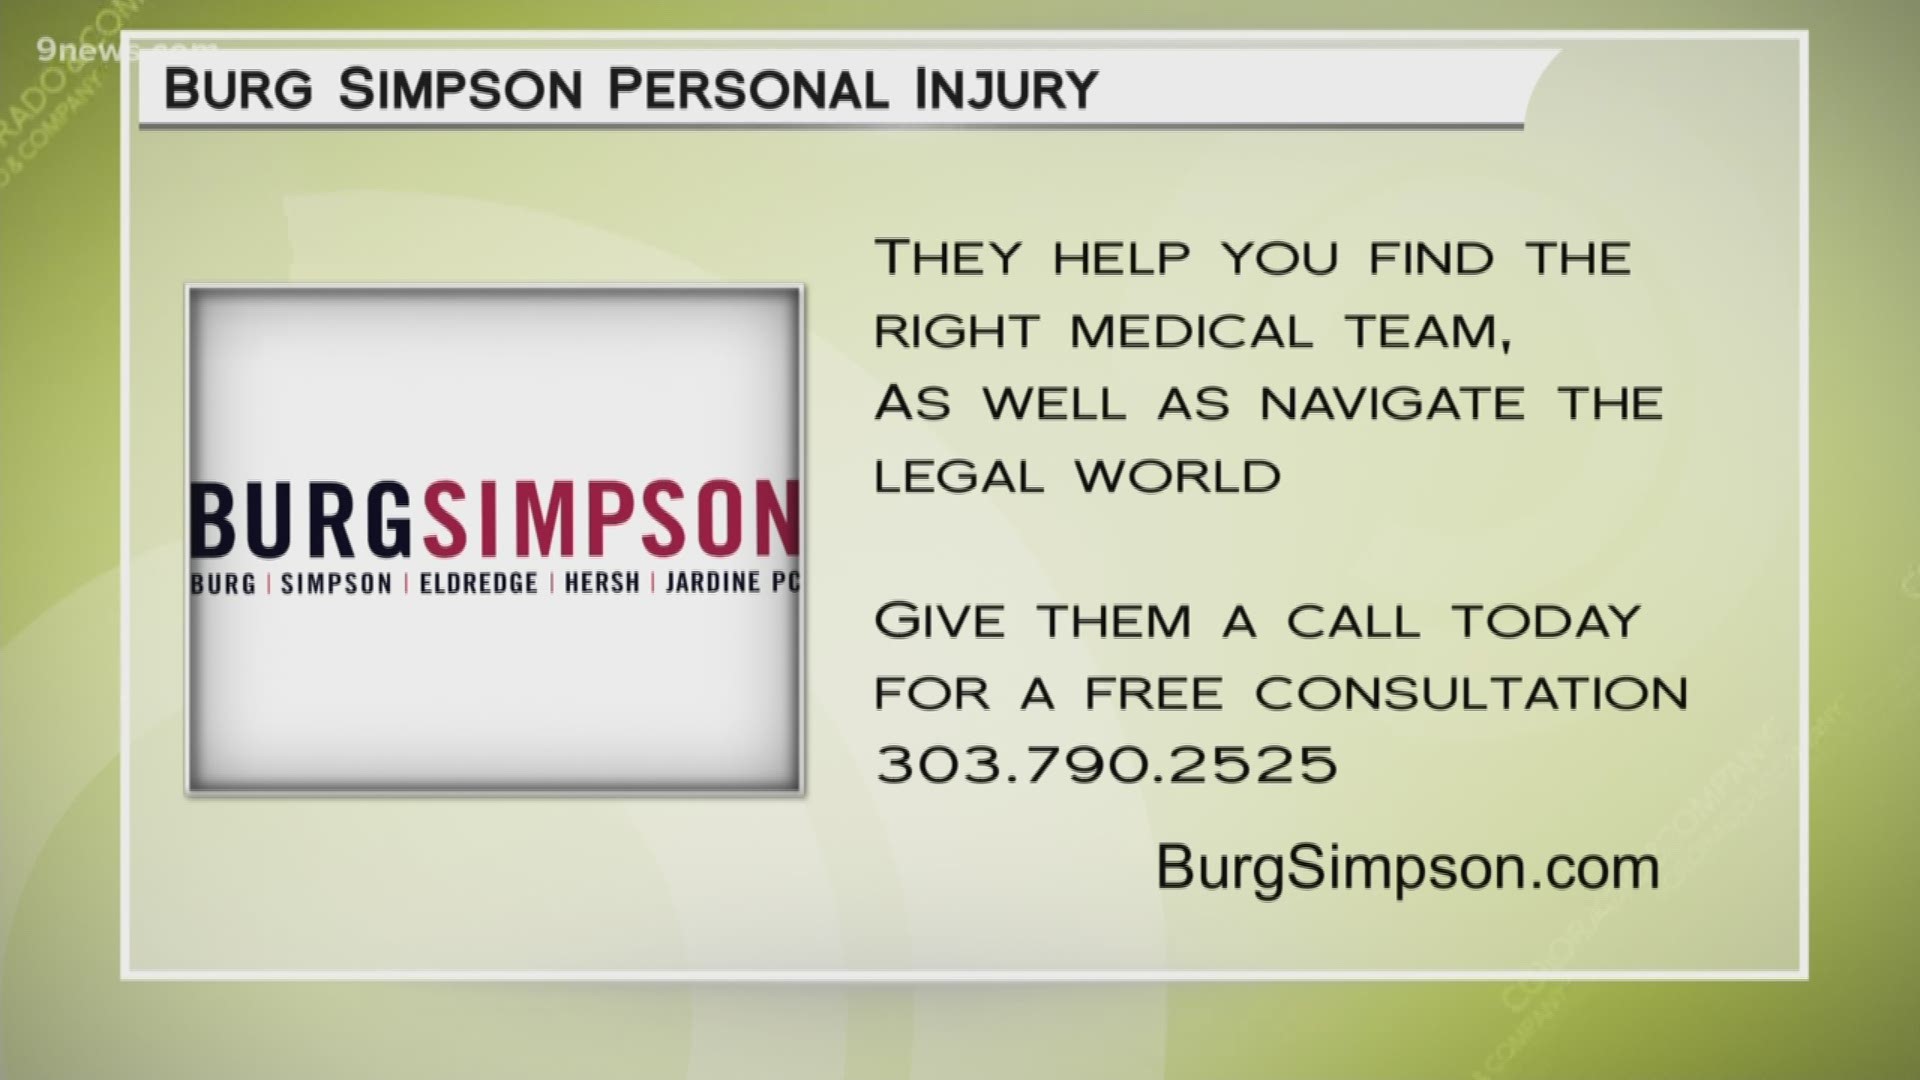 Let Burg Simpson be your legal experts when dealing with medical negligence. Call 303.790.2525 to schedule a free consultation. Learn more at www.BurgSimpson.com.